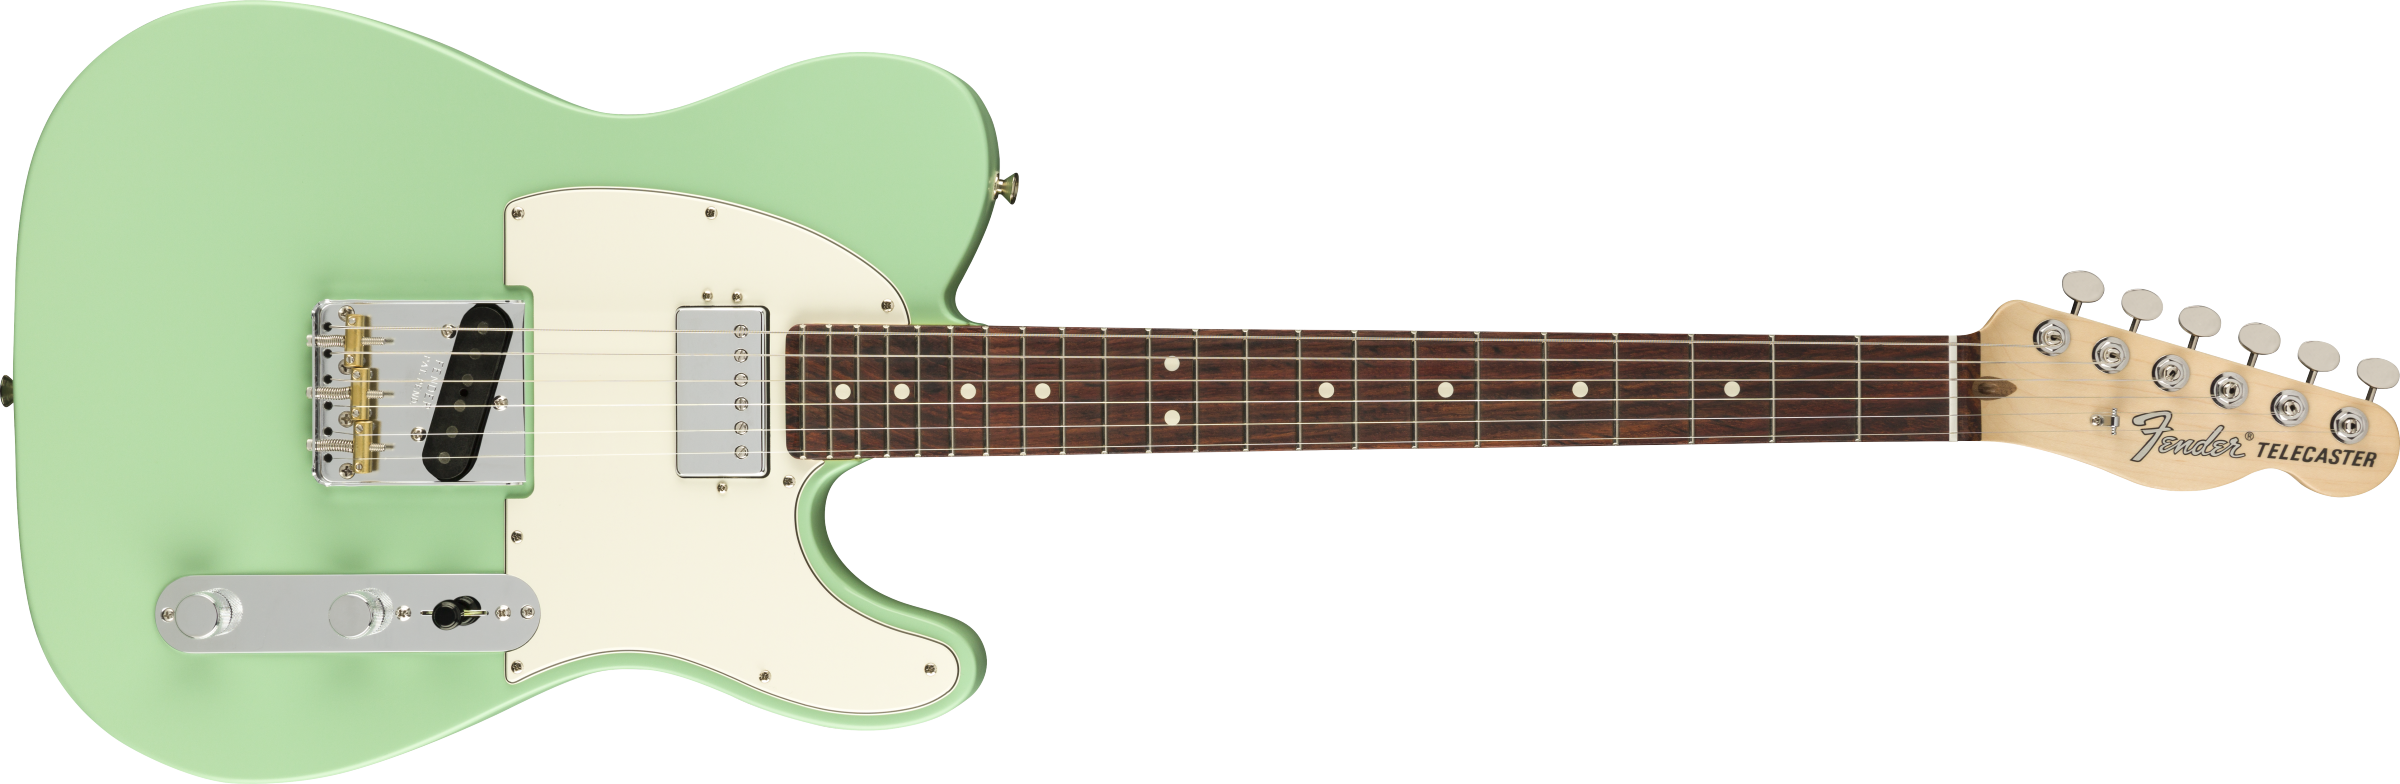 Fender® American Performer Telecaster® with Humbucking, Rosewood Fingerboard, Satin Surf Green